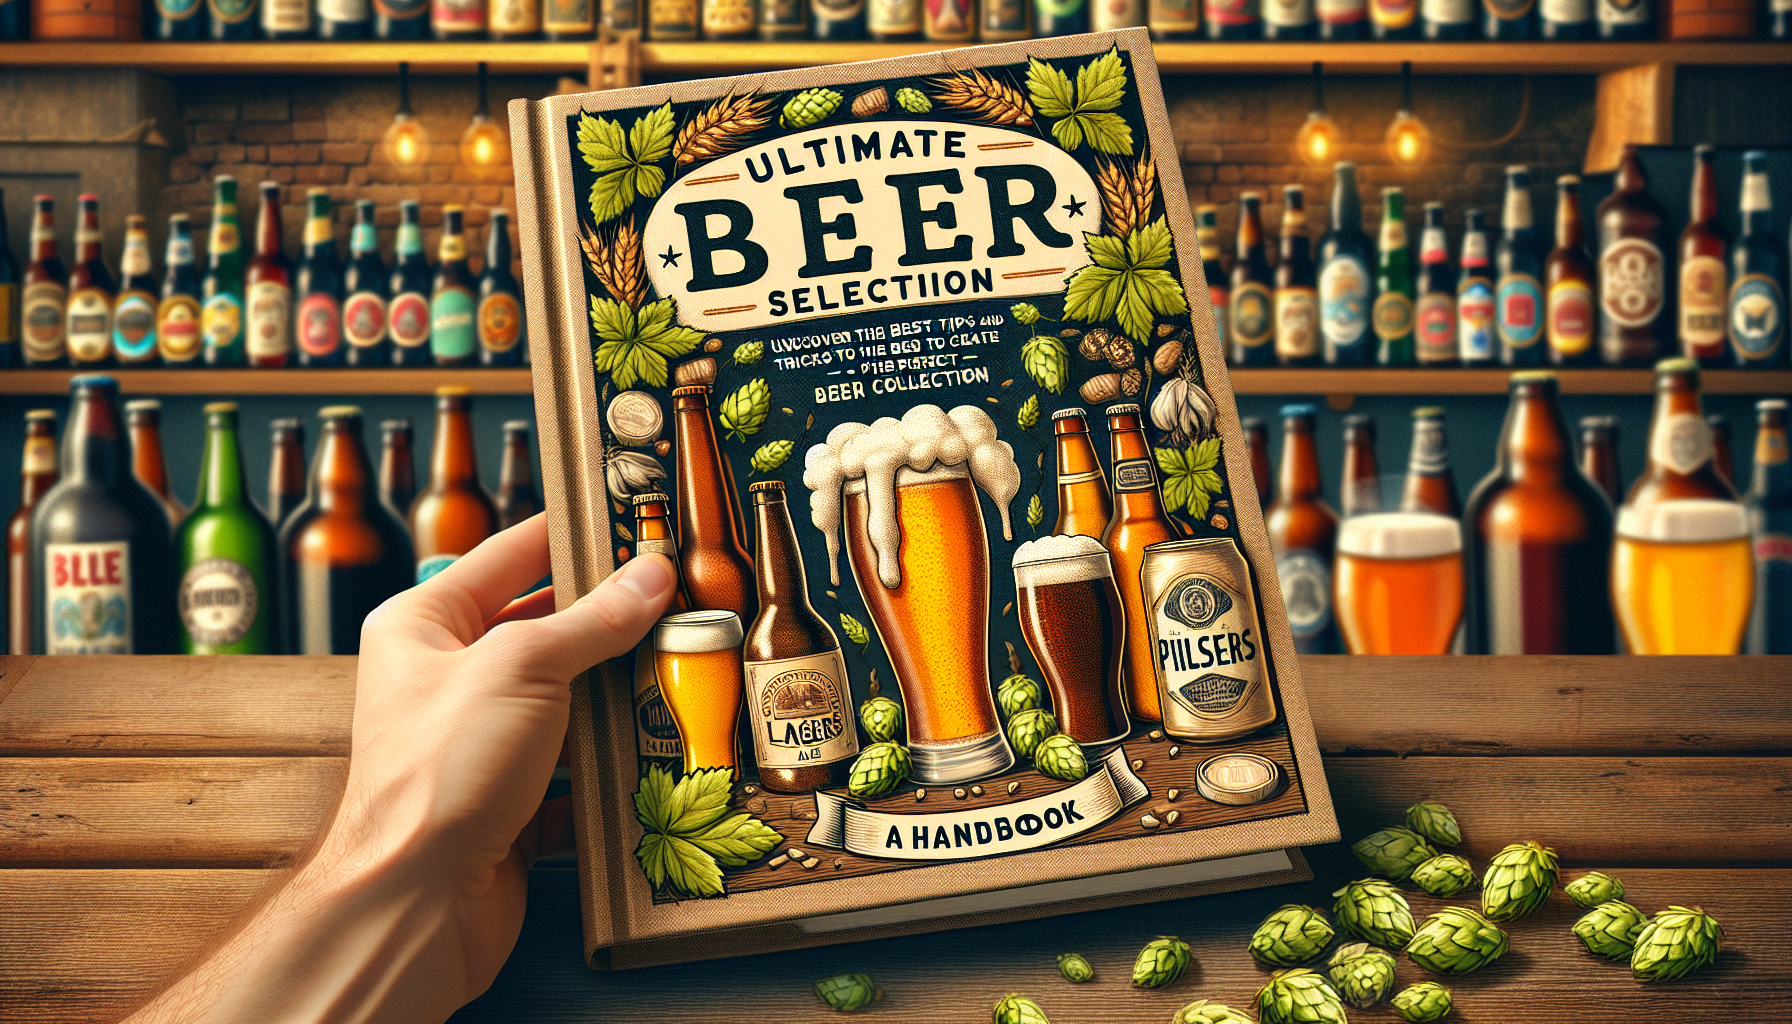 How to Build the Ultimate Beer Selection?